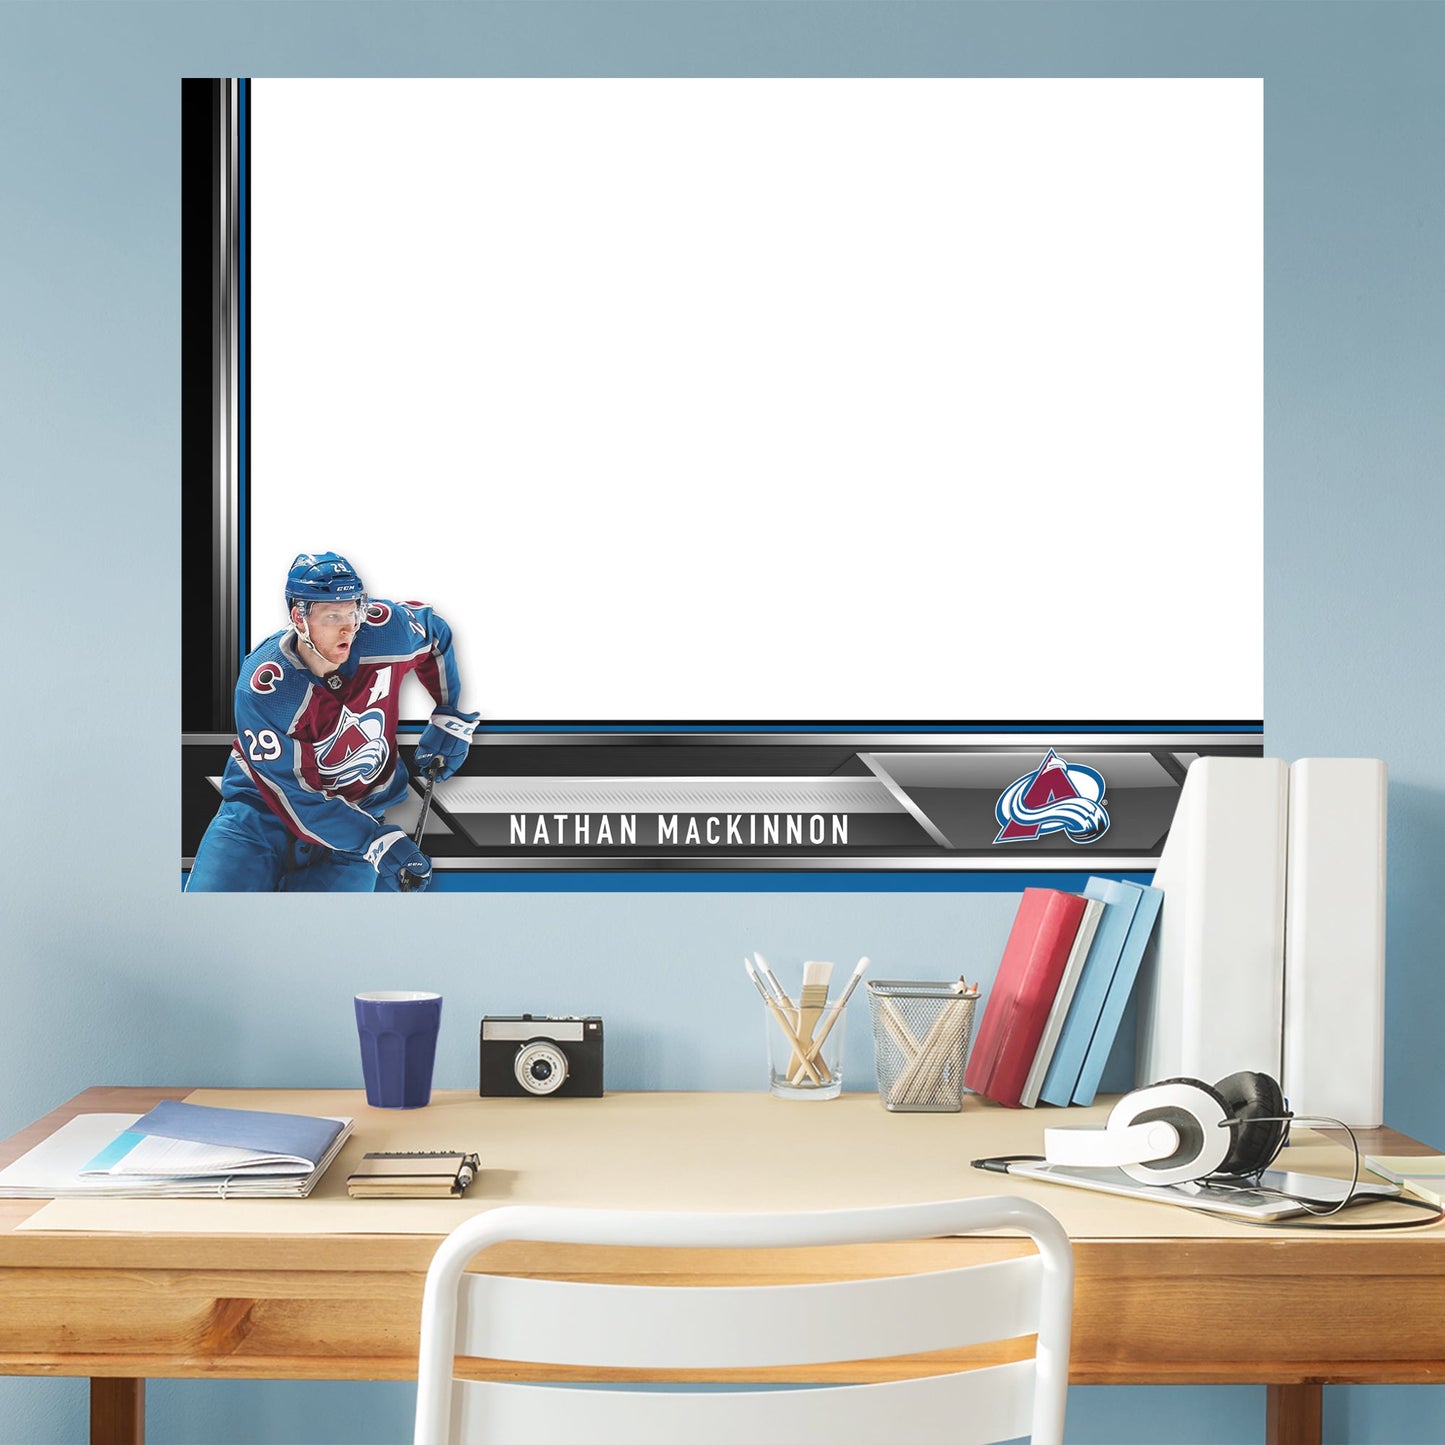 Colorado Avalanche: Nathan MacKinnon Dry Erase Whiteboard - Officially Licensed NHL Removable Adhesive Decal